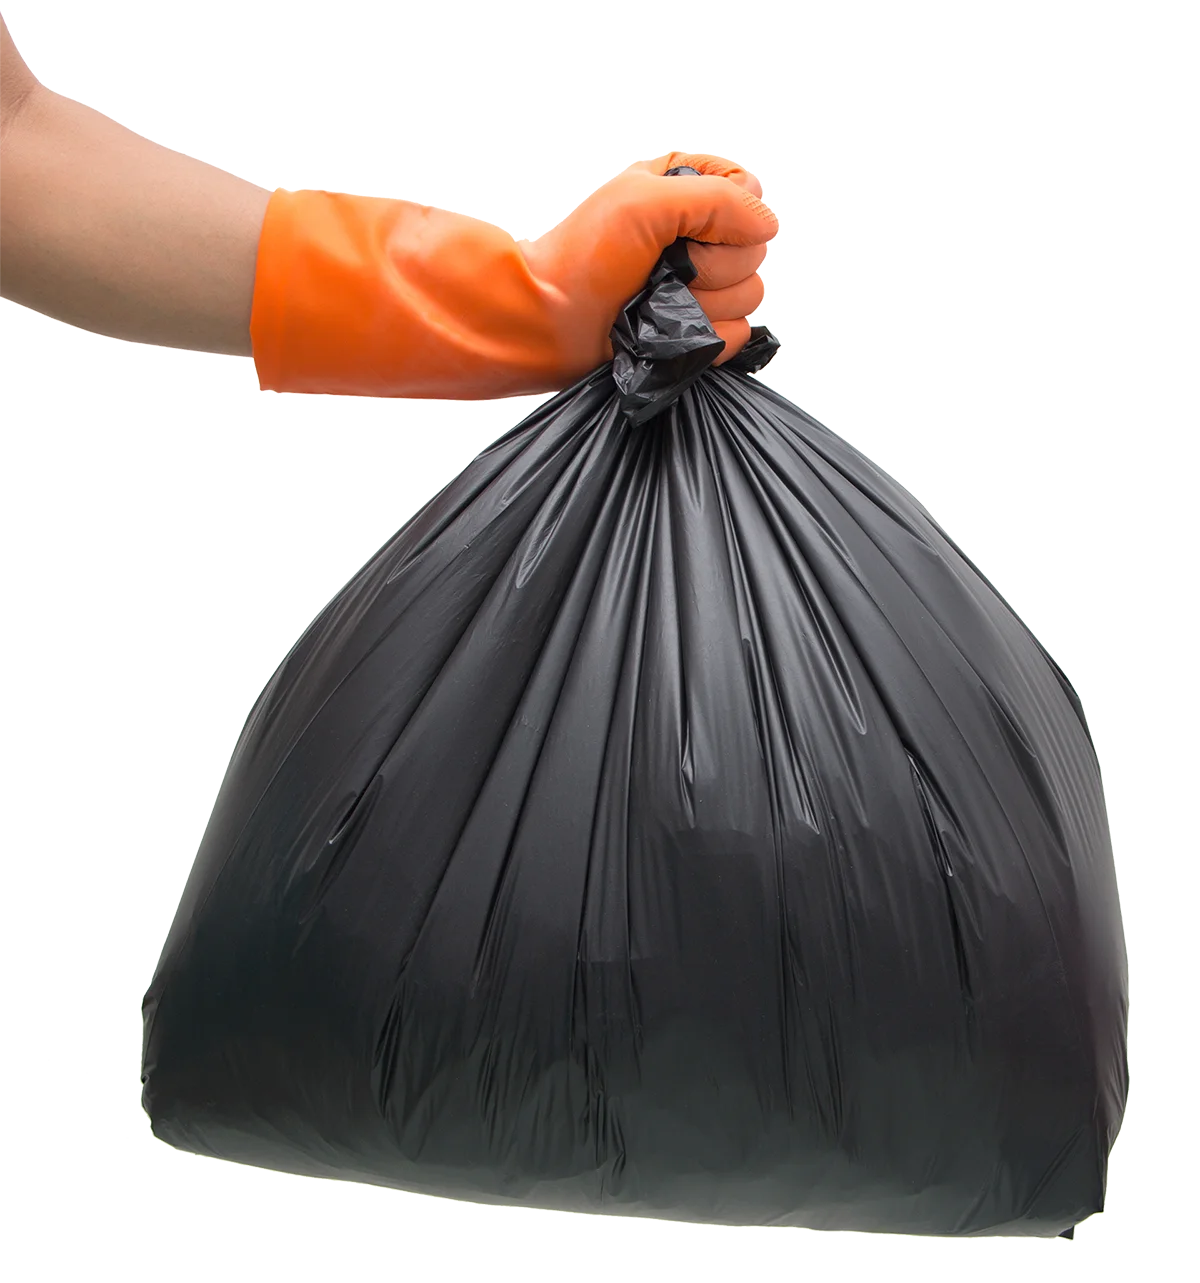 Residential Waste Service offers top apartment valet trash services near you.